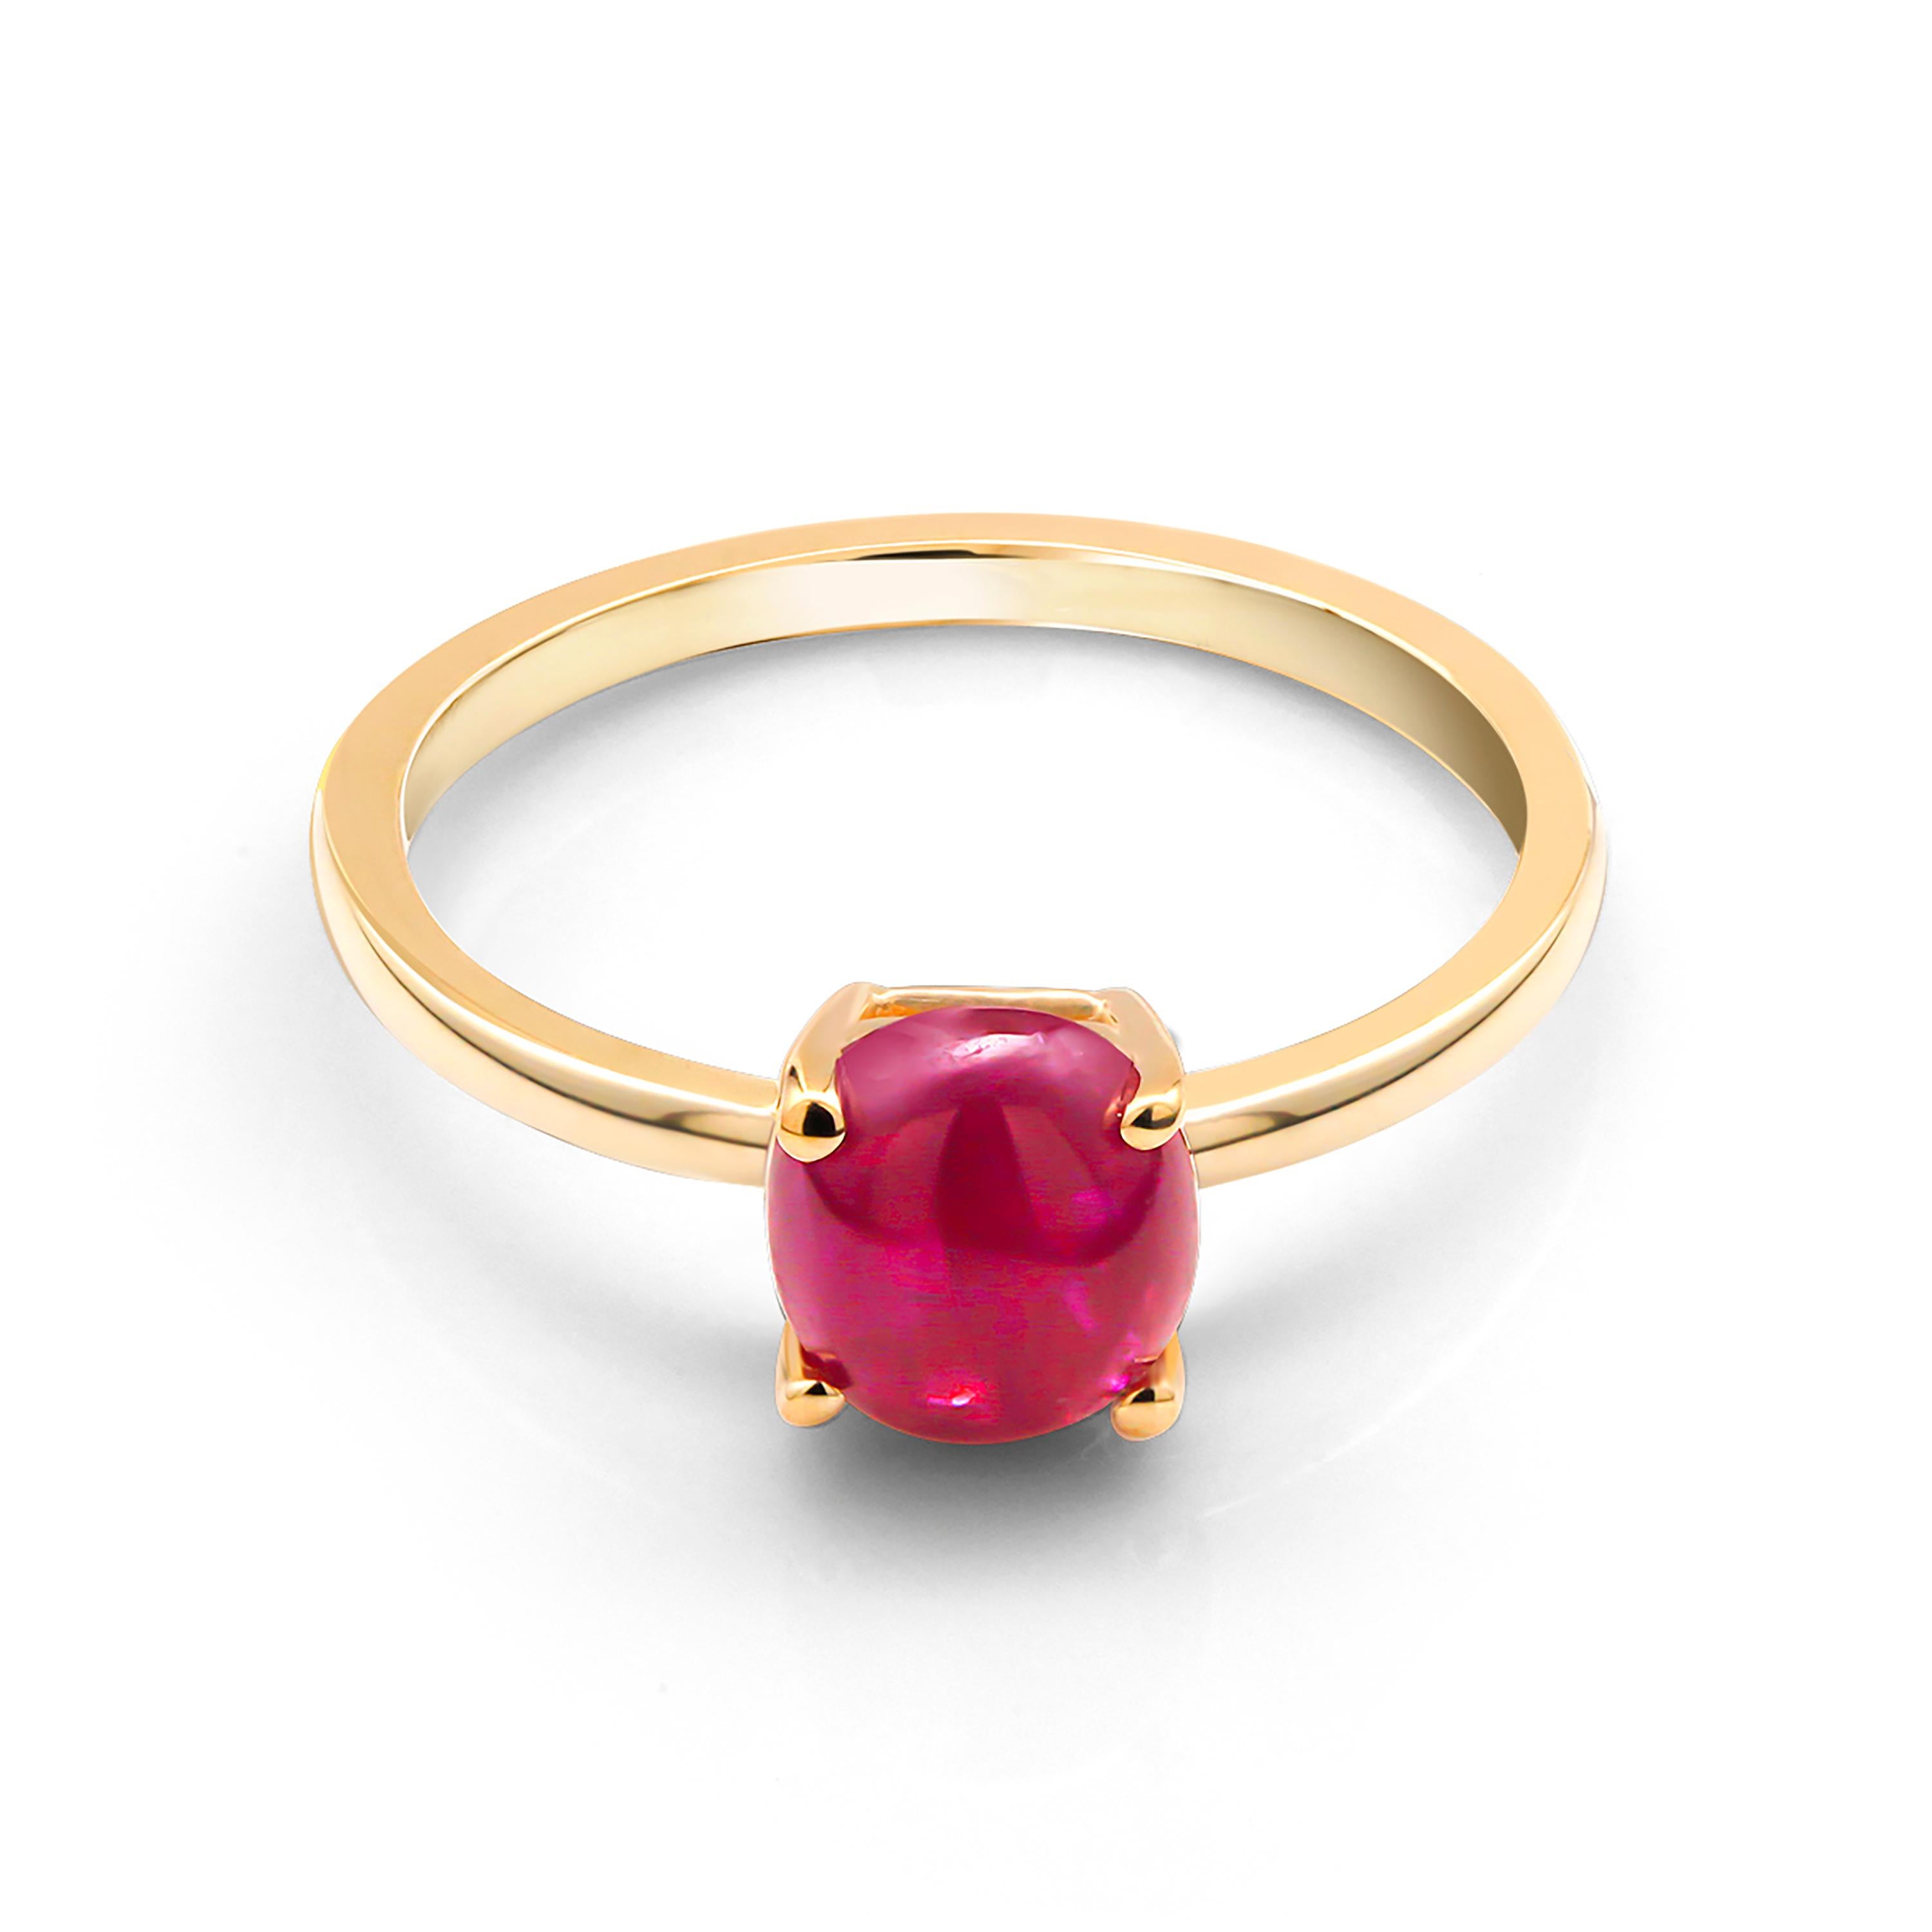 Fourteen karats yellow gold fashionable modern stacking or solitaire cocktail ring
Cushion shape Sugar Loaf Burma red, transparent cabochon Burma ruby weighing 1.65 carat 
Ruby hue is of strawberry red tone 
Ring size 7.25 In Stock
The ring can be